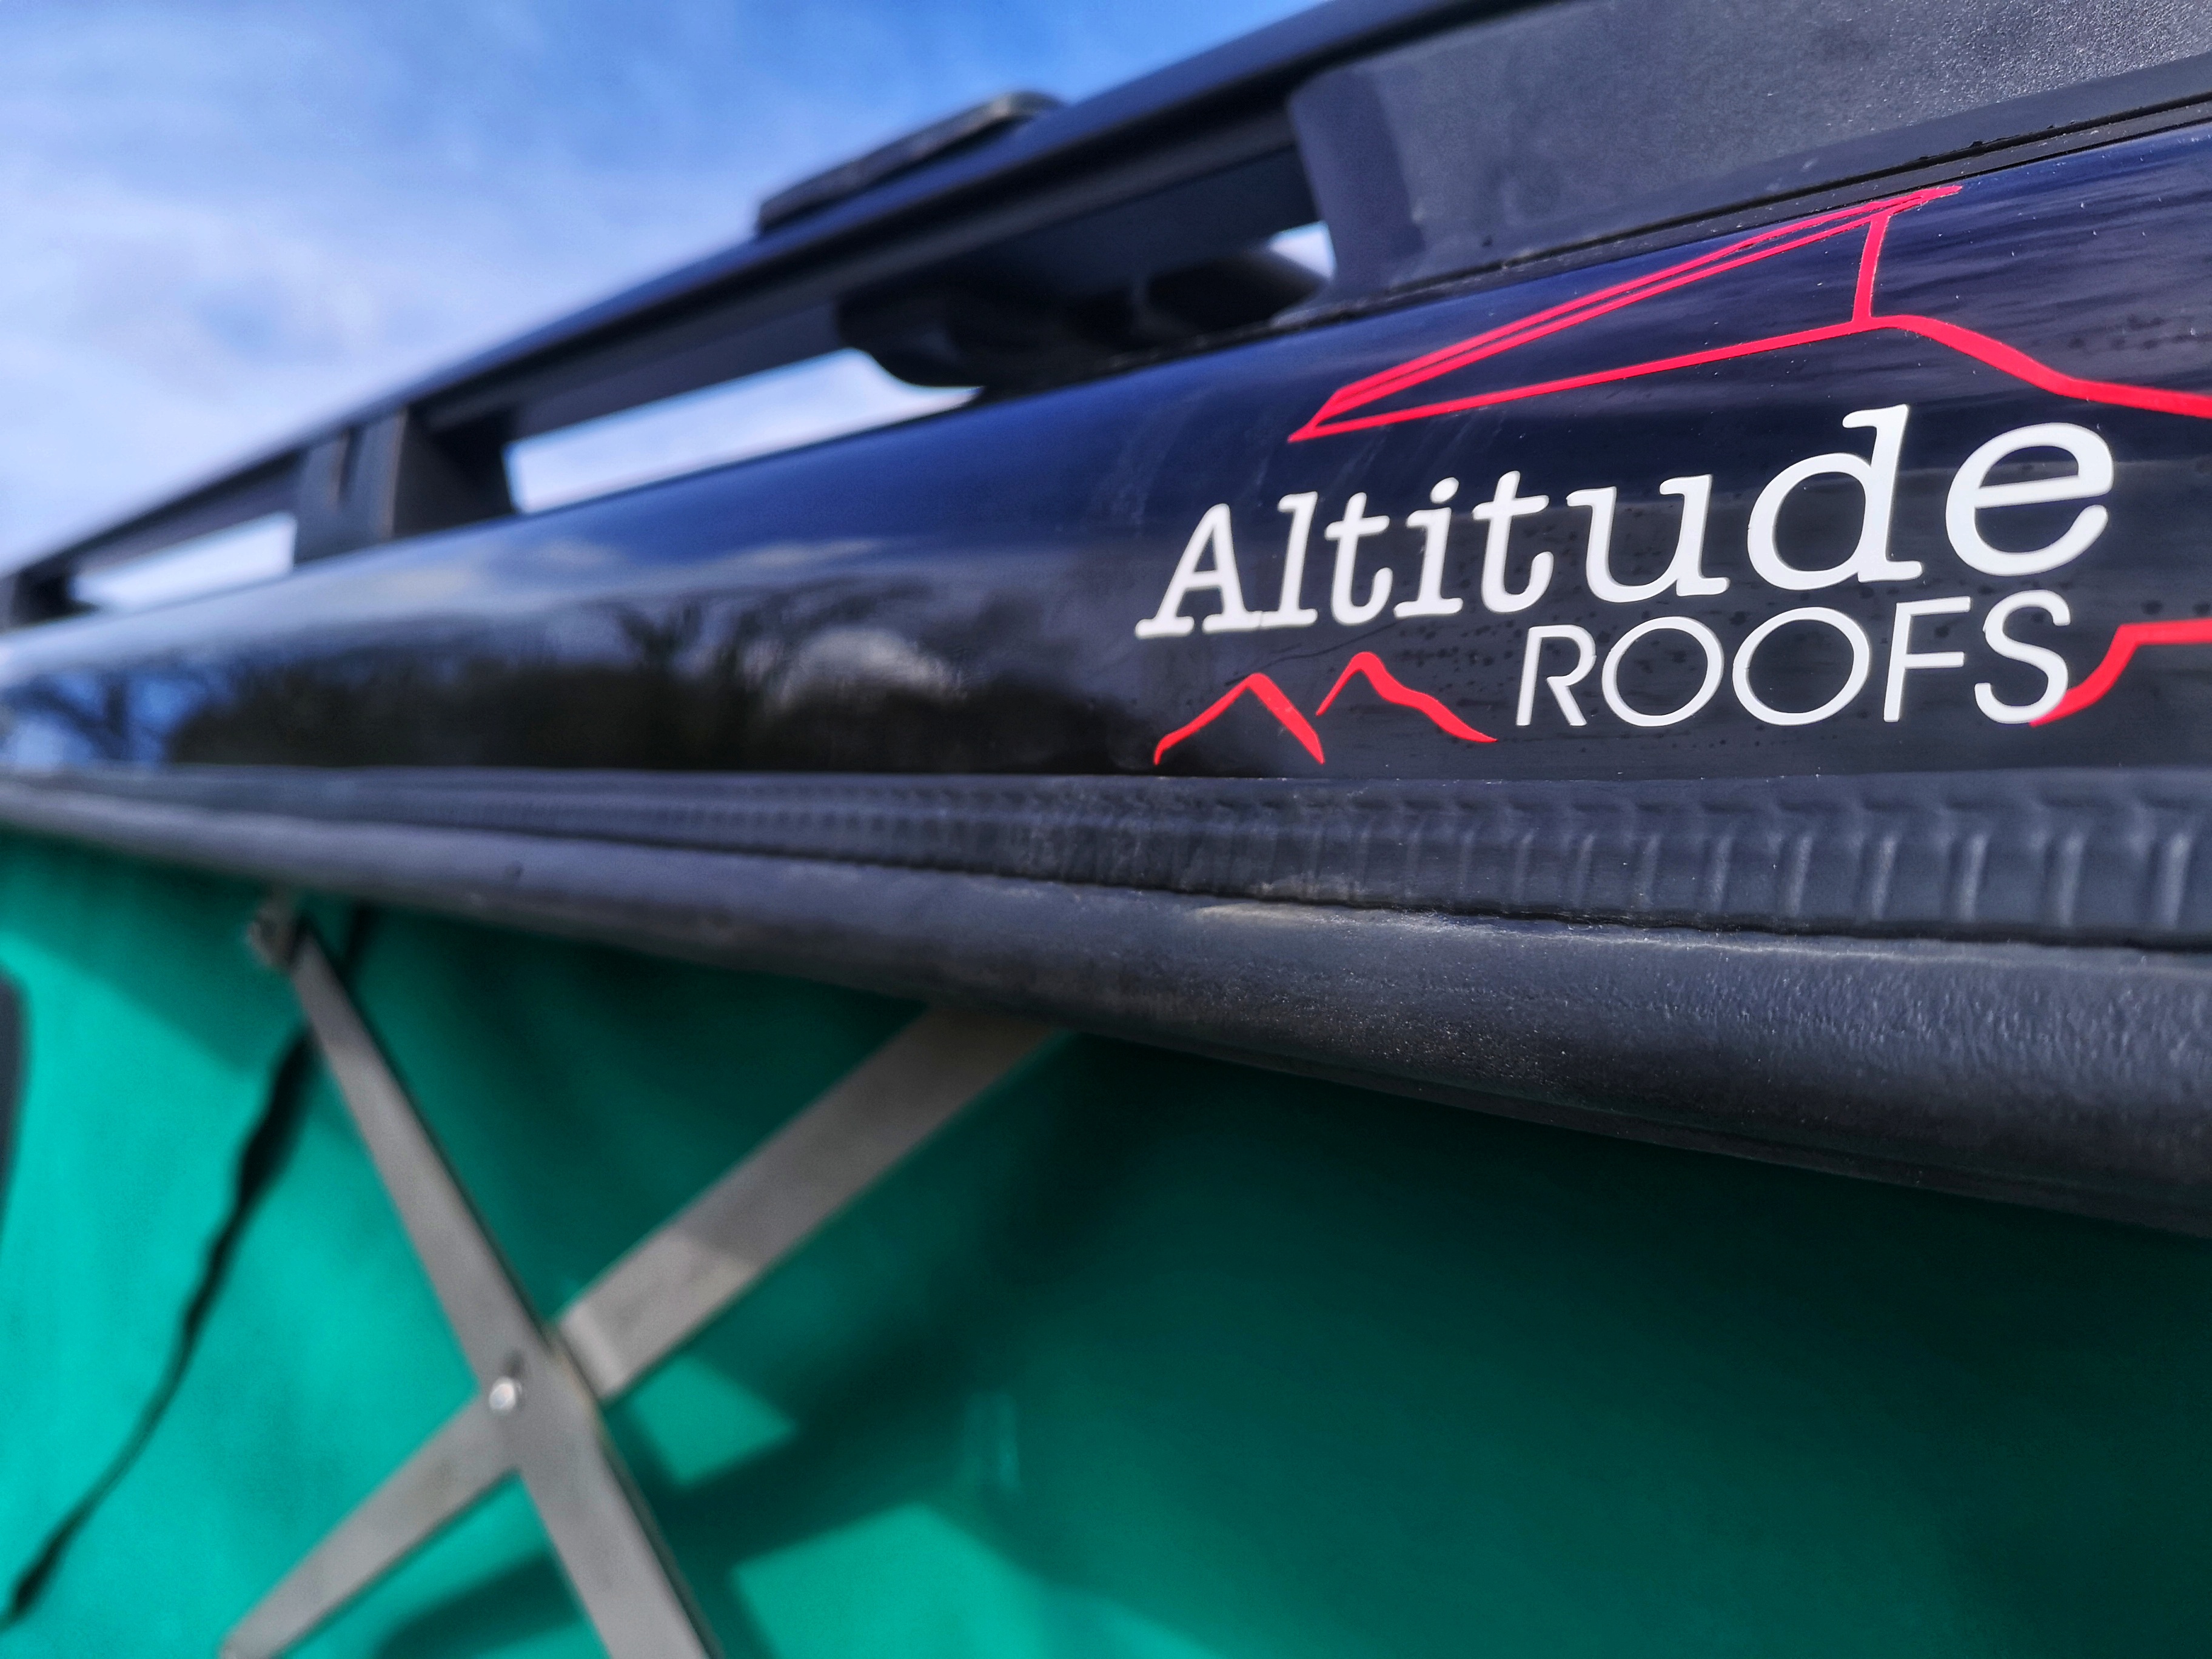 Altitude elevating roofs